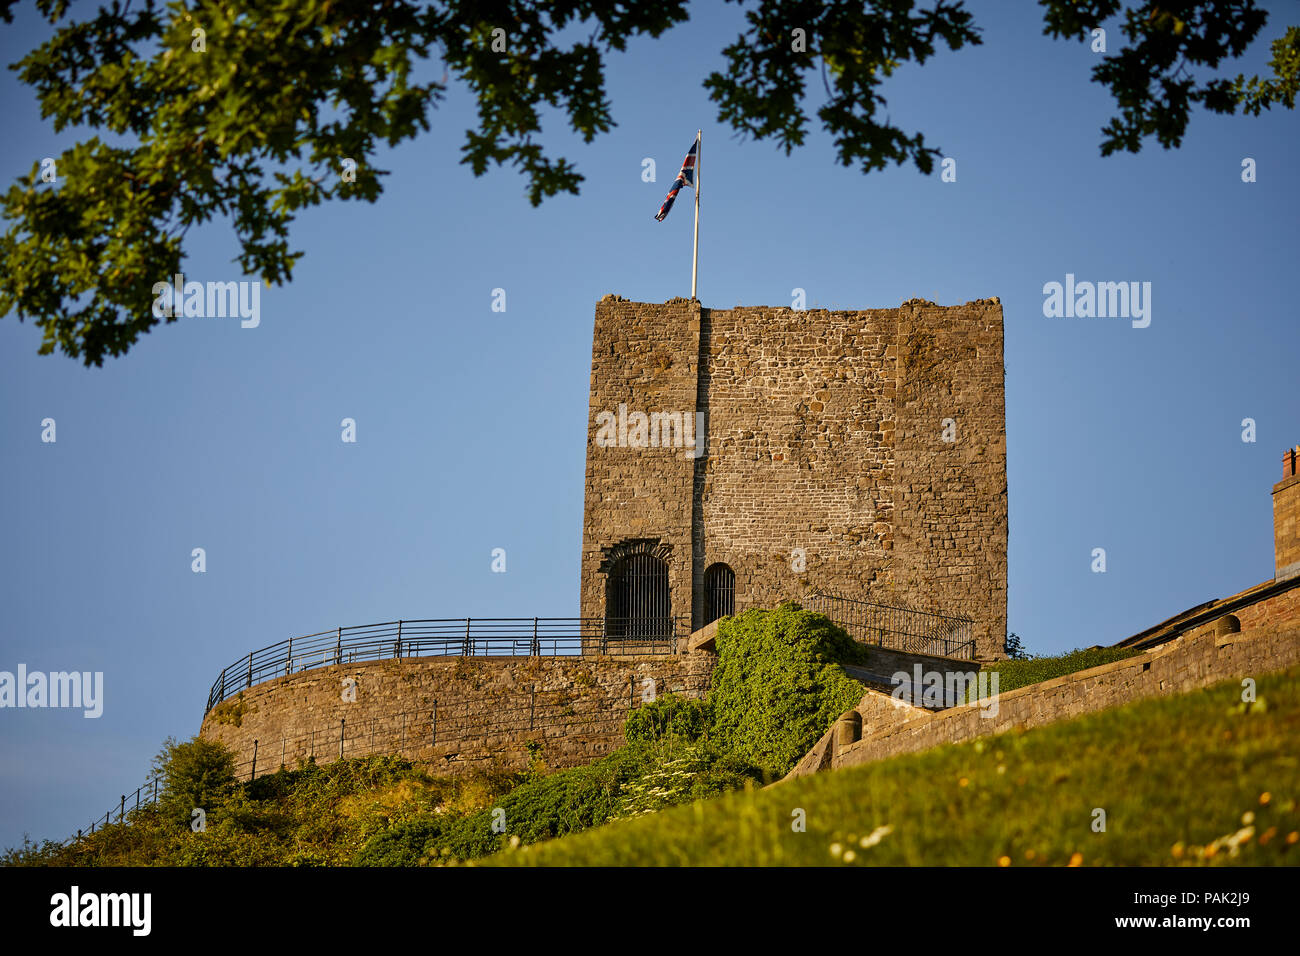 Clitheroe Borough of Ribble Valley Lancashire  The keep at Clitheroe Castle with union flag flying Grade I listed landmark on limestone crag Stock Photo